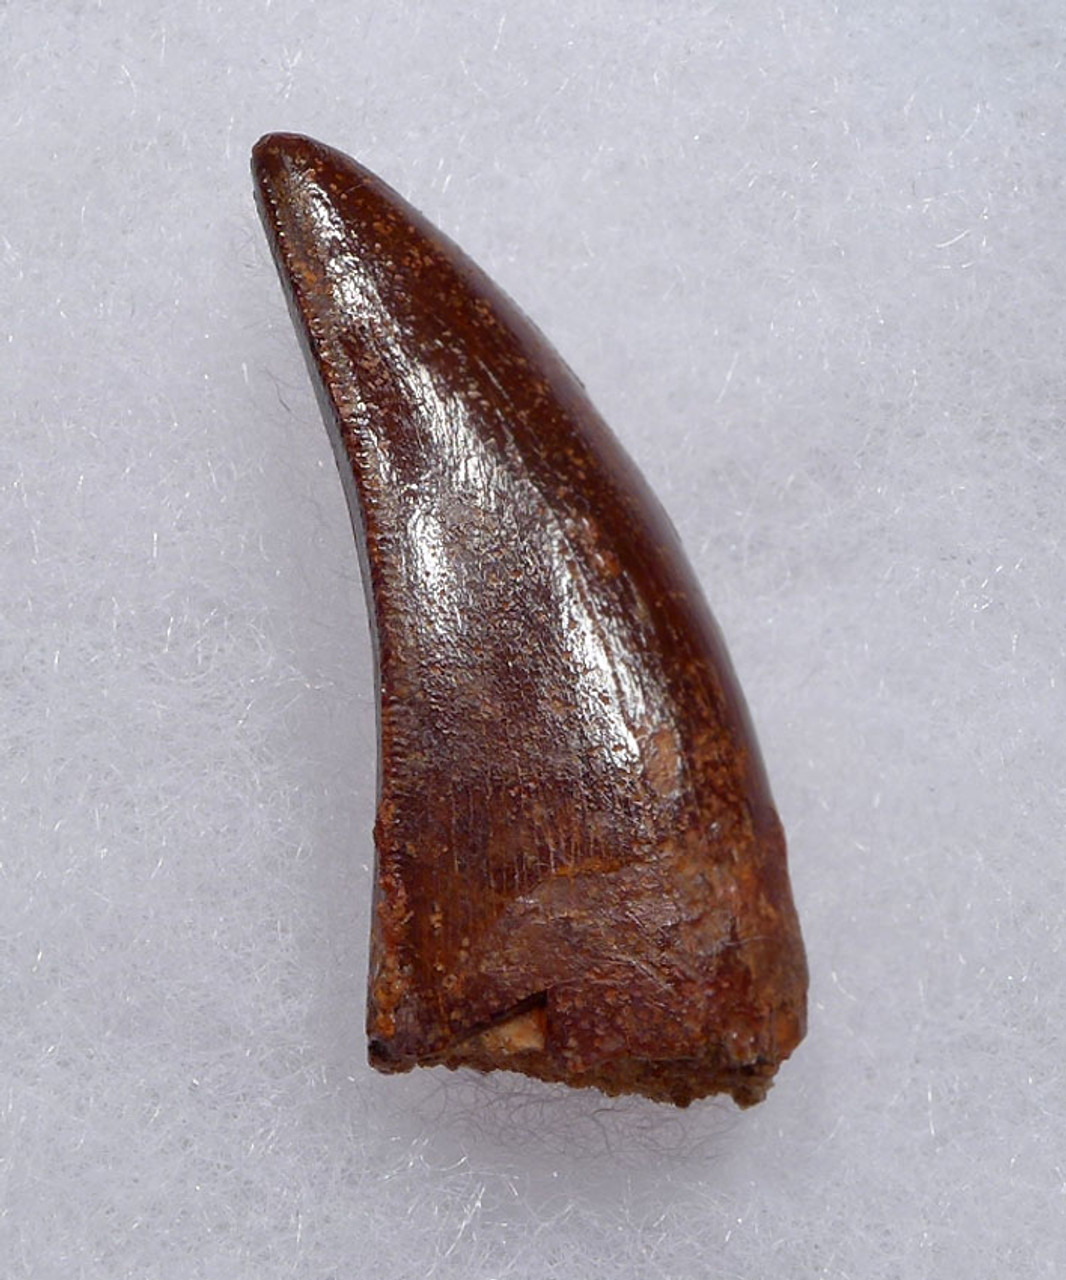 FINEST GRADE UNBROKEN DELTADROMEUS DINOSAUR TOOTH FROM THE FRONT OF JAW *DT11-044